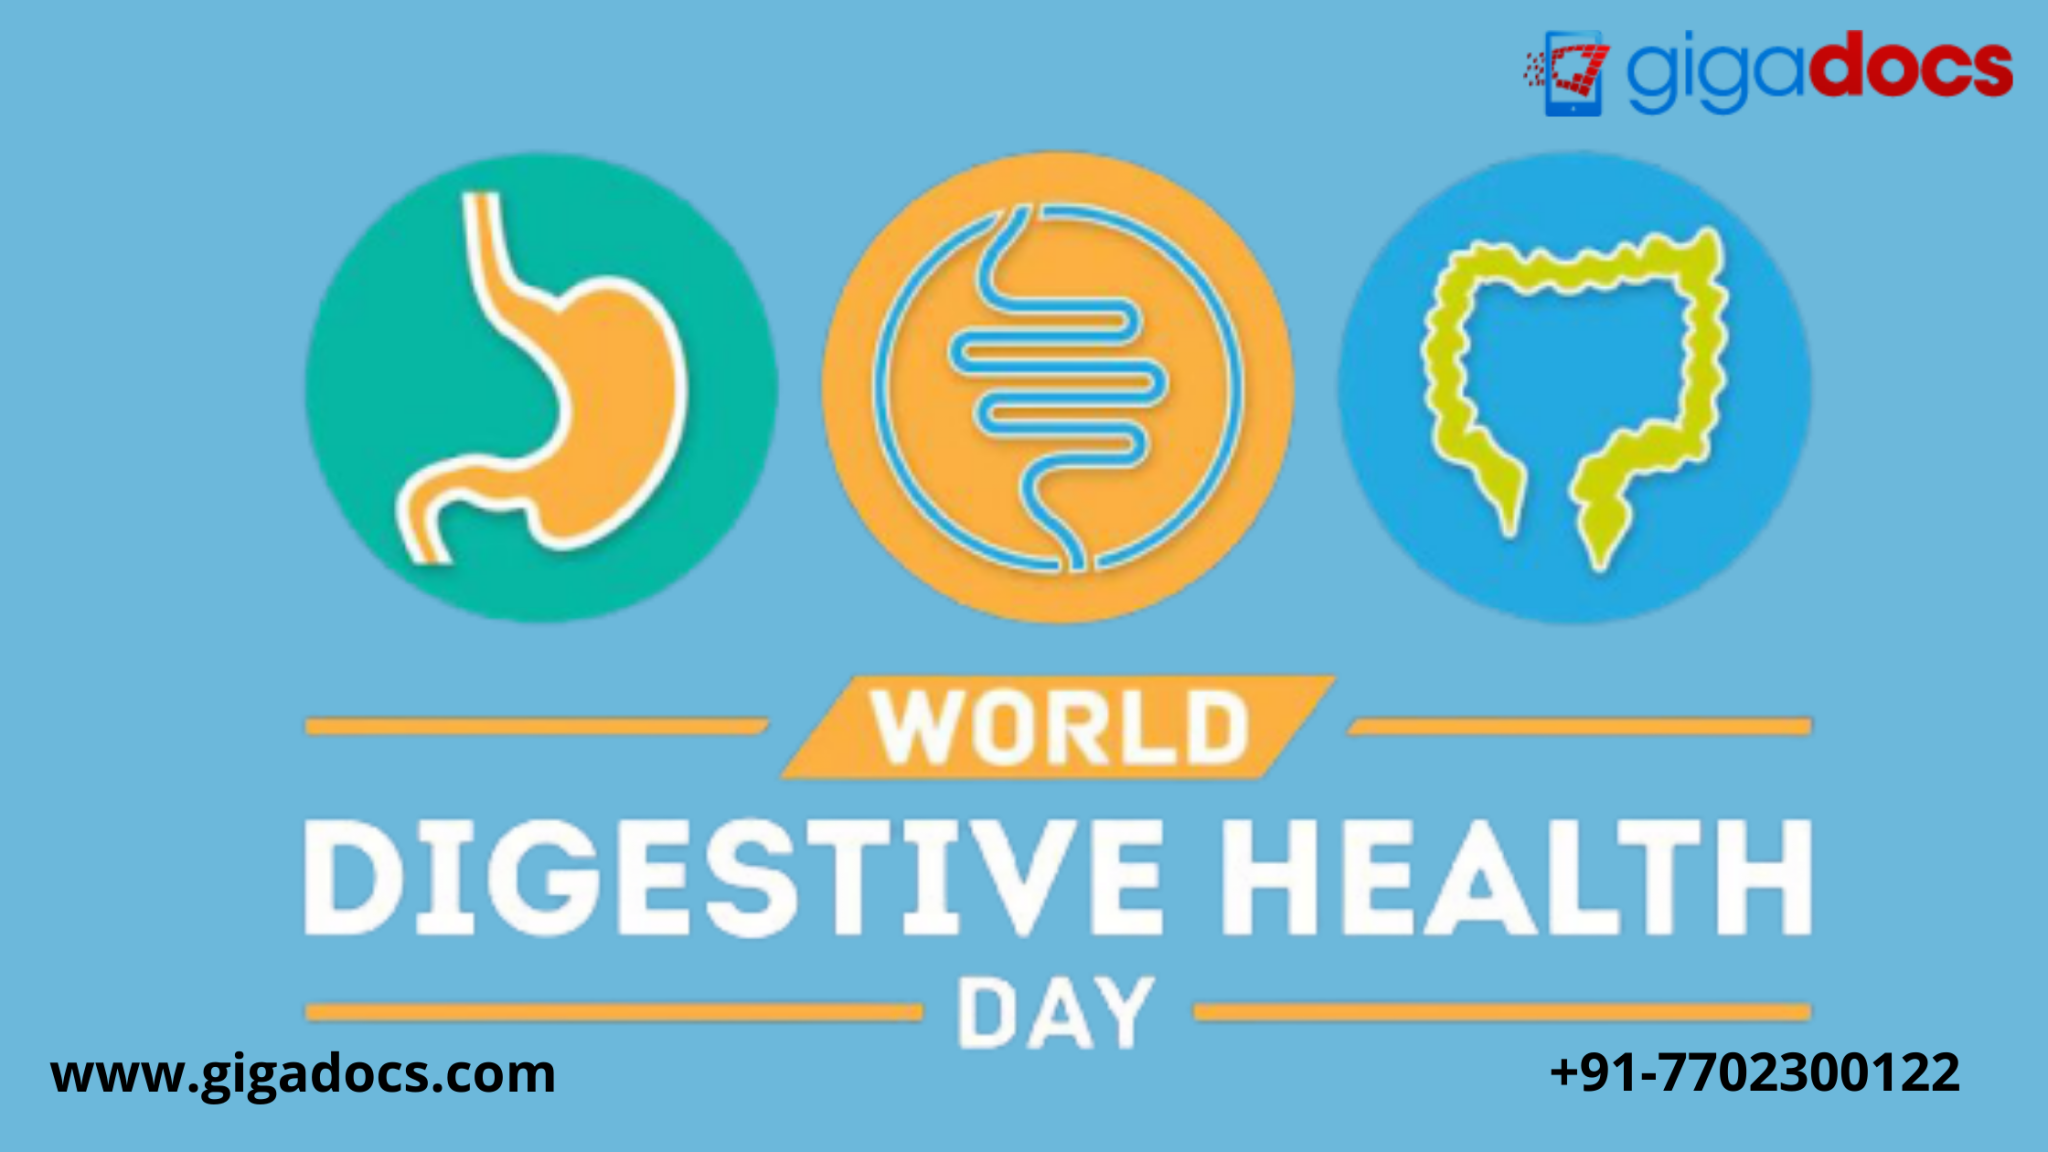 World Digestive Health Day What are the five most Common Digestive